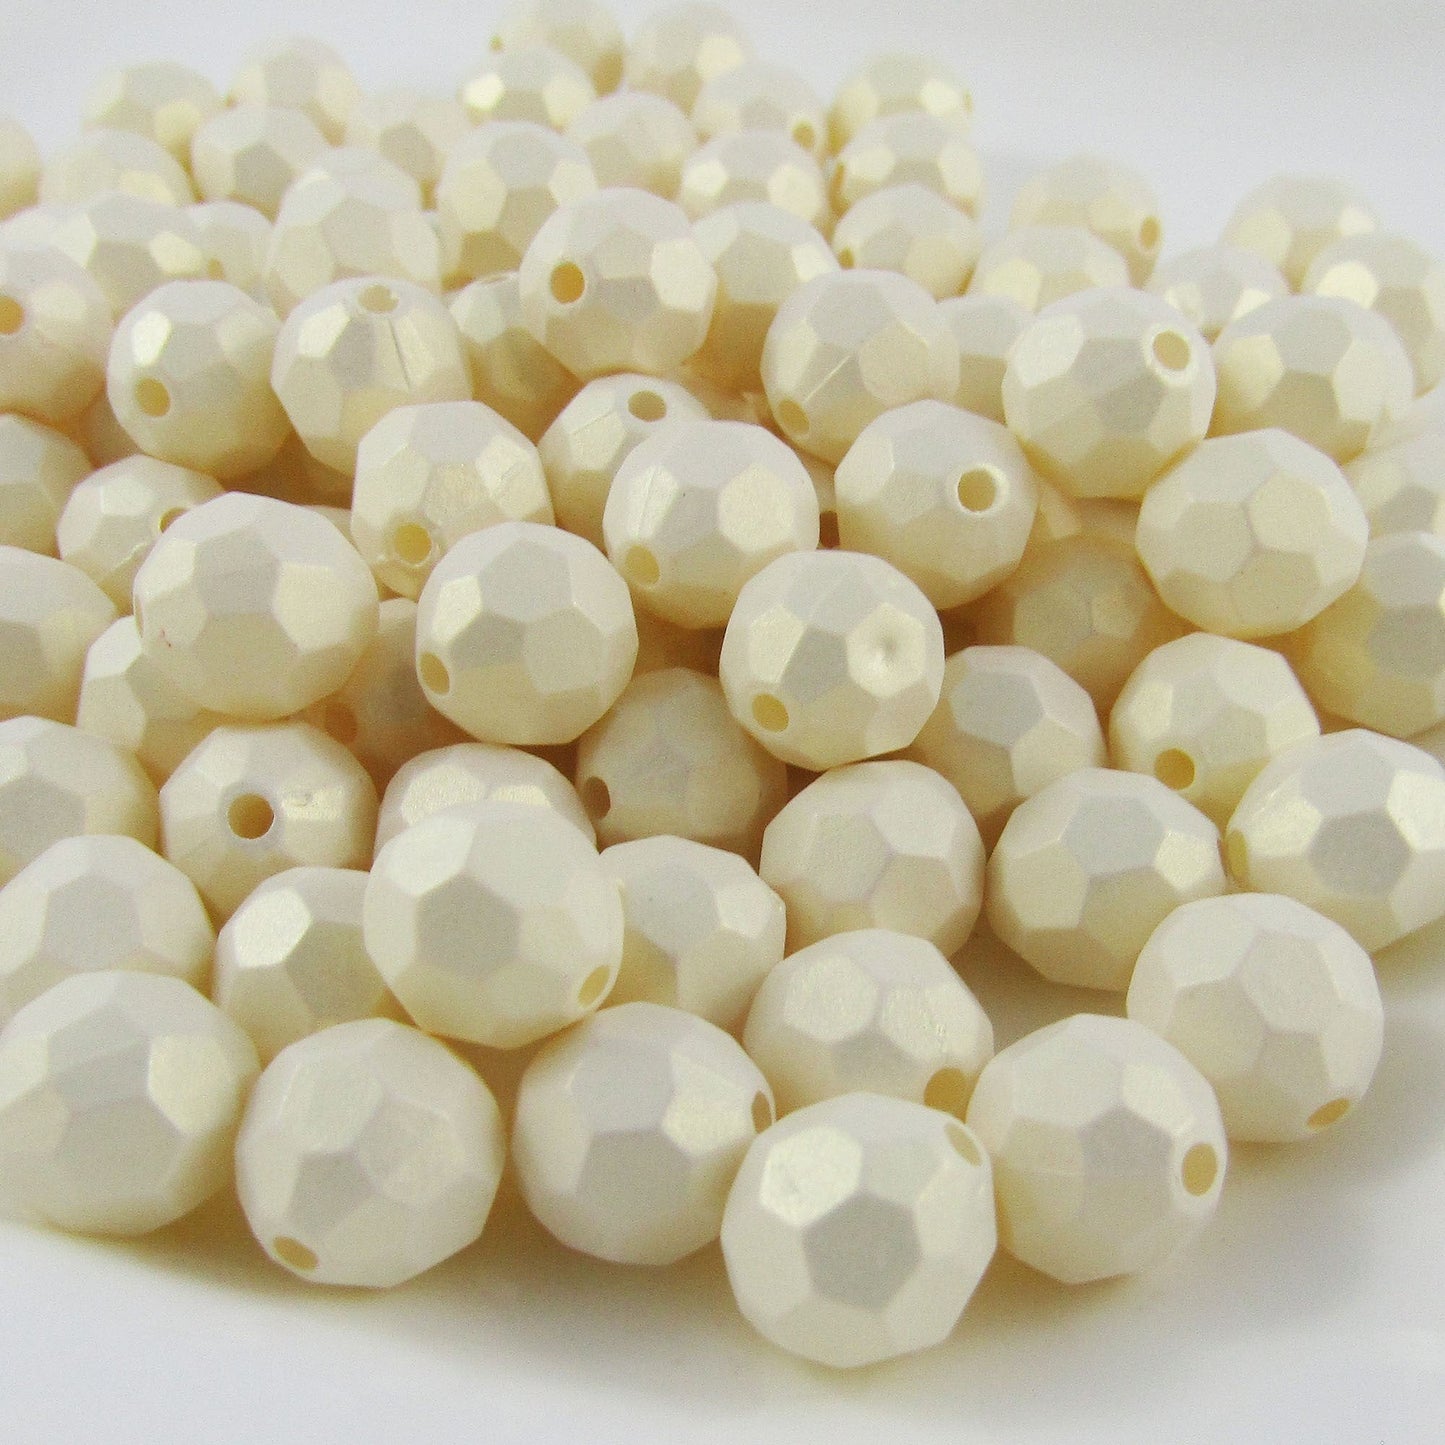 50g 100+pcs Cream Acrylic Faceted Round Craft Beads 10mm